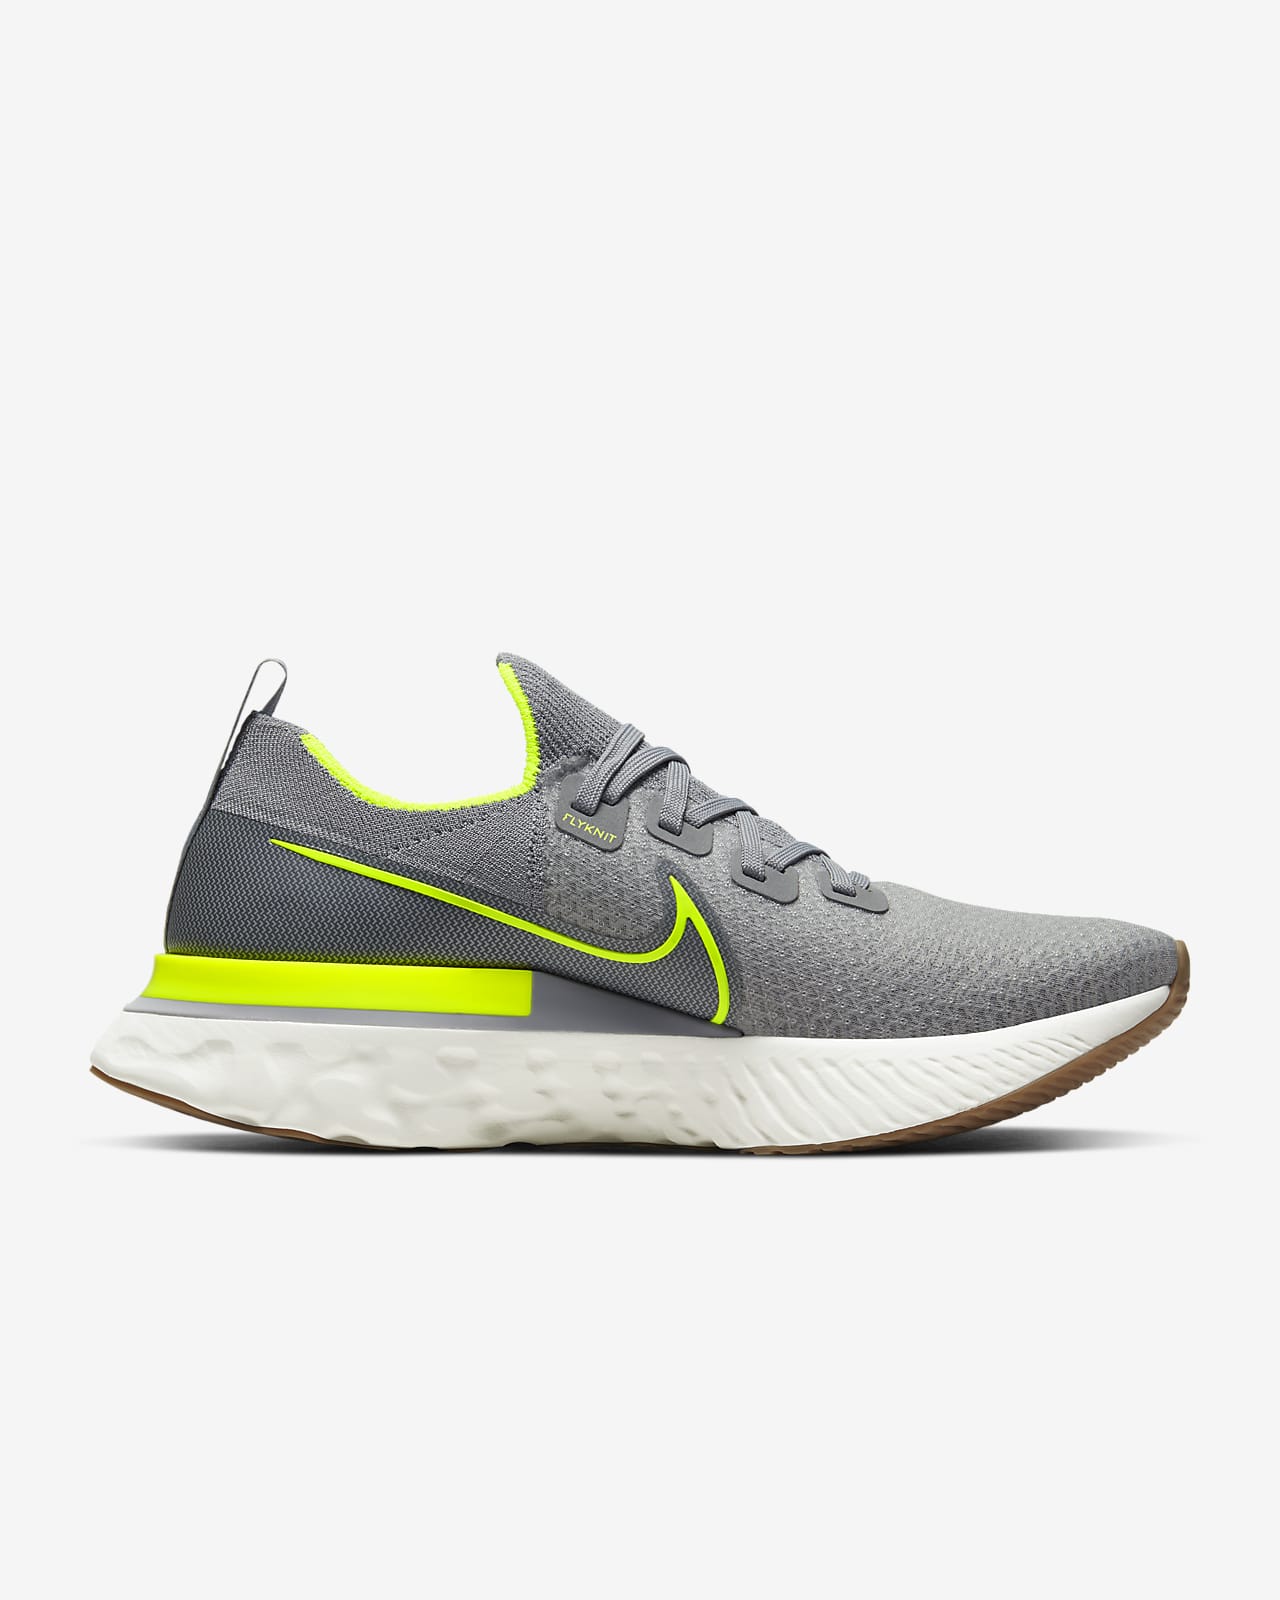 is nike react good for running